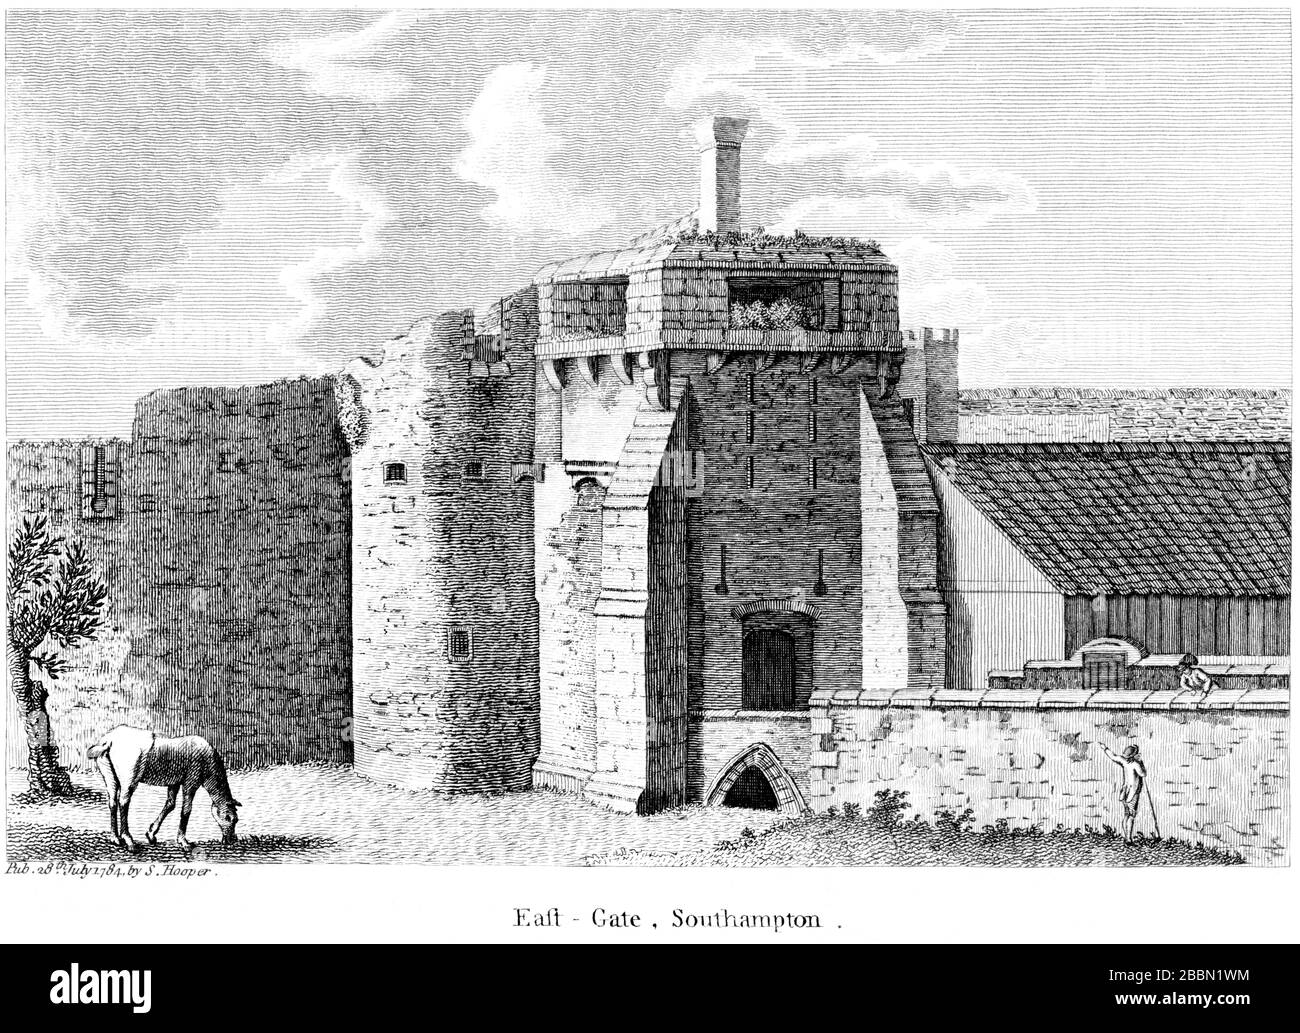 An engraving of the East Gate, Southampton 1784 scanned at high resolution from a book published around 1786. Believed copyright free. Stock Photo